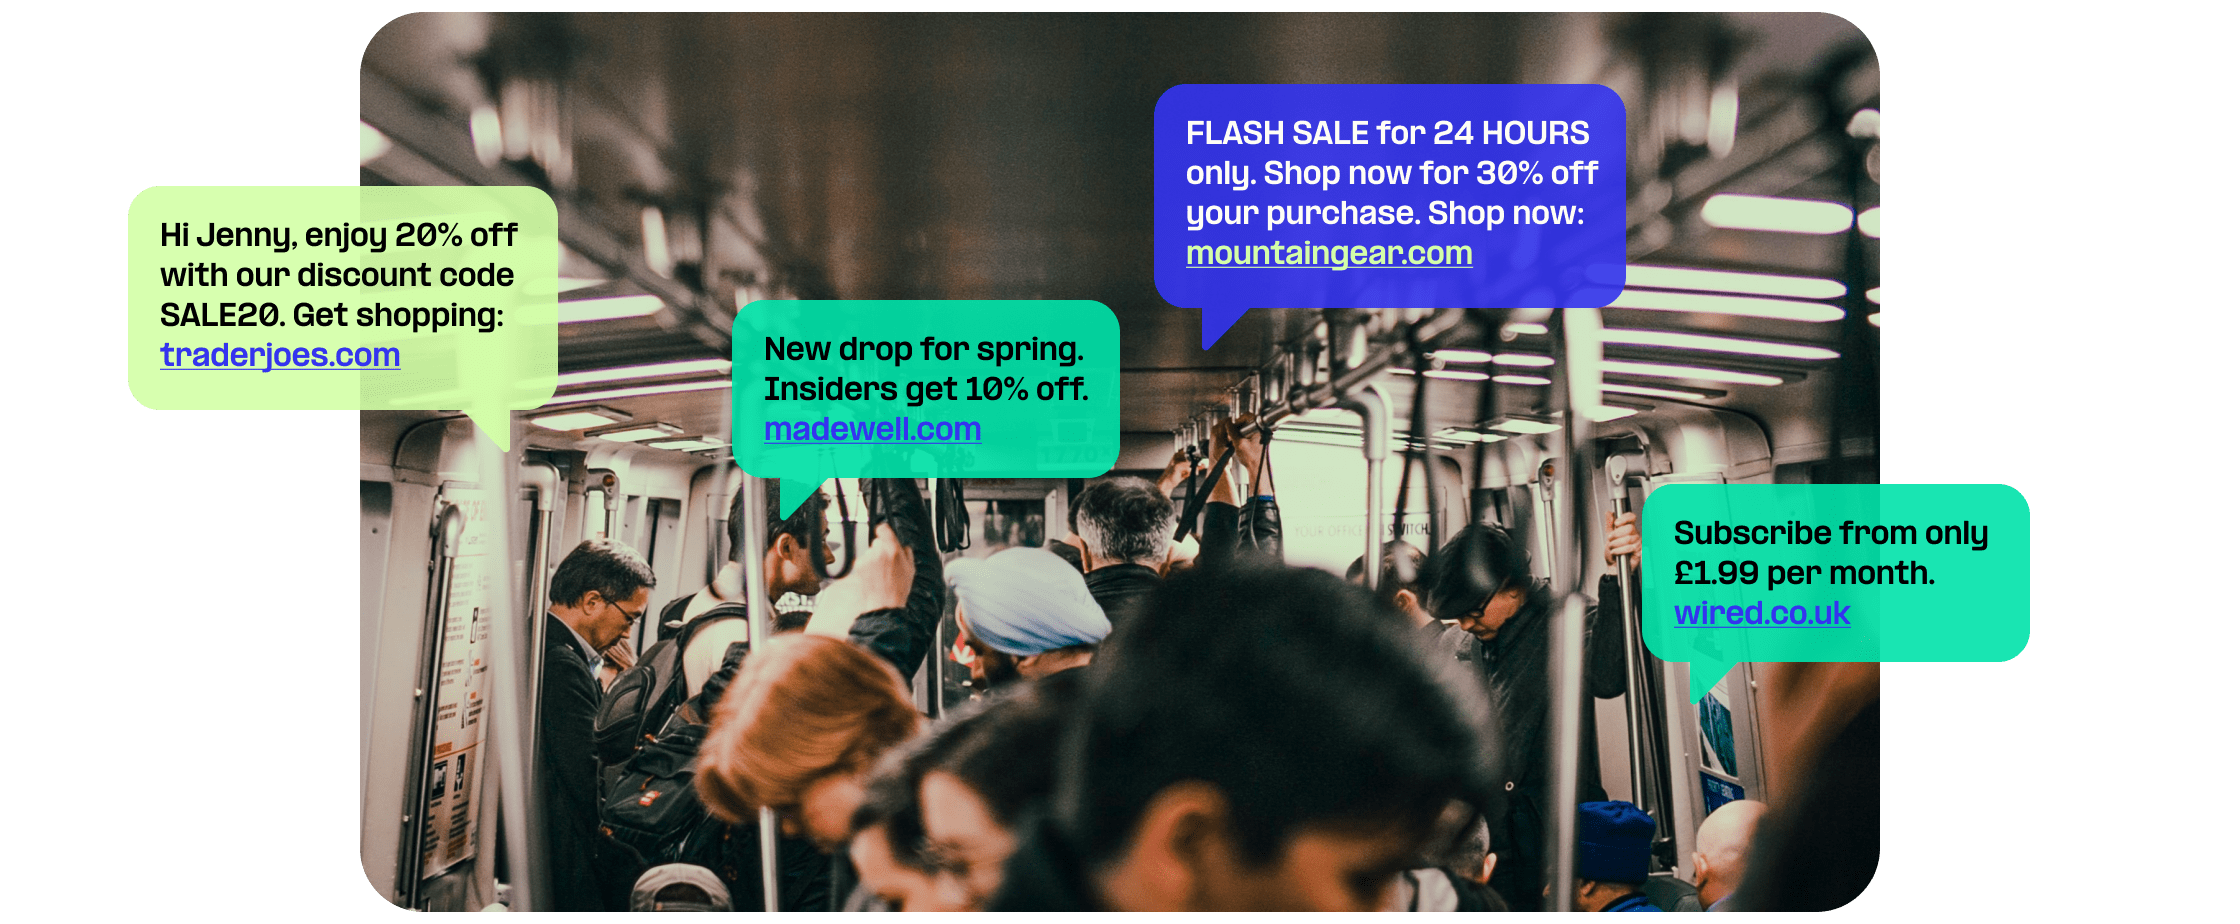 People on subway receive sms marketing alerts